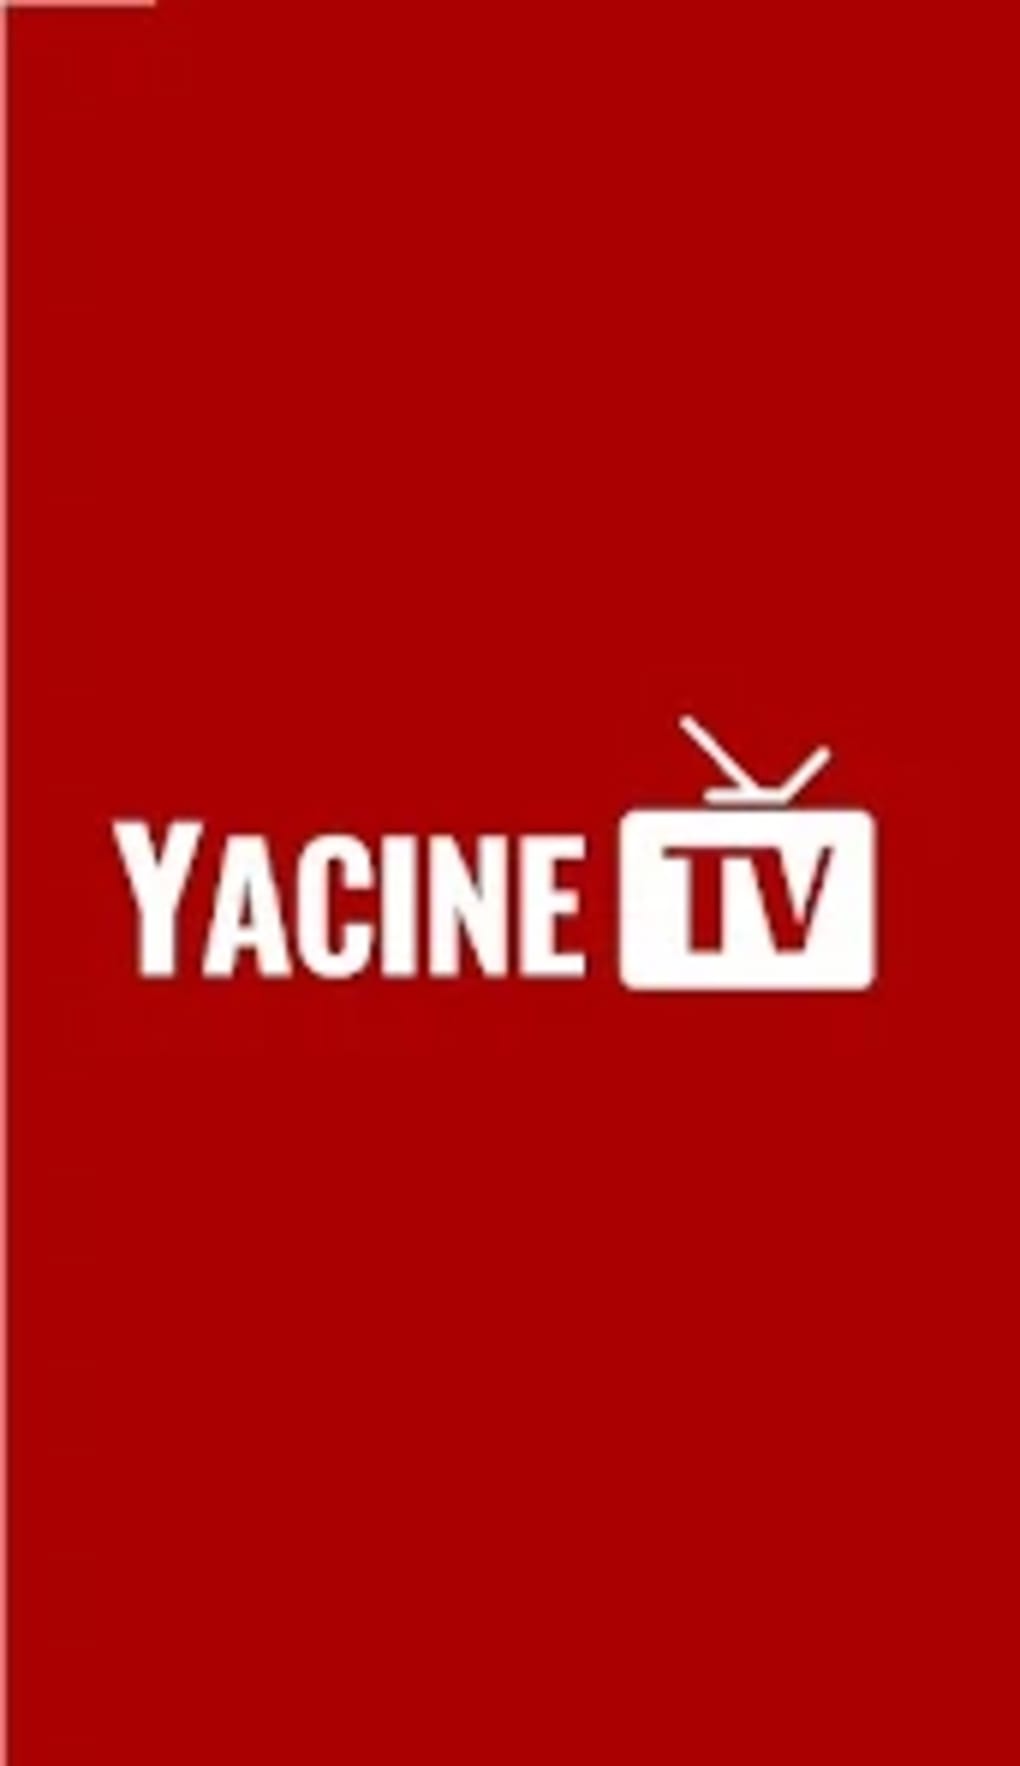 Yacine TV for Android